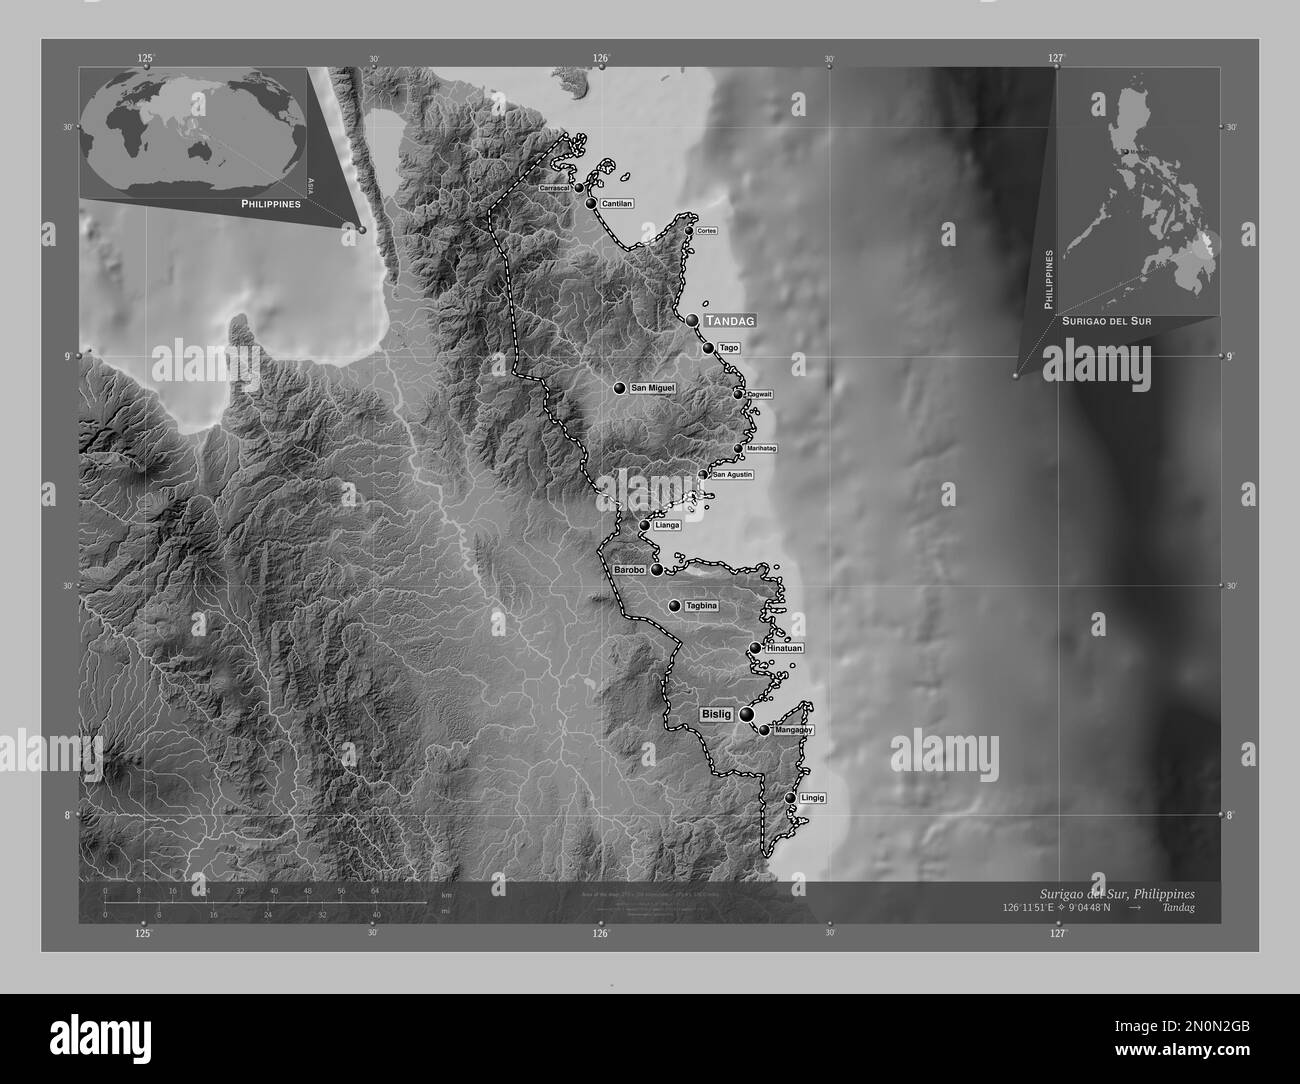 Surigao del Sur, province of Philippines. Grayscale elevation map with lakes and rivers. Locations and names of major cities of the region. Corner aux Stock Photo